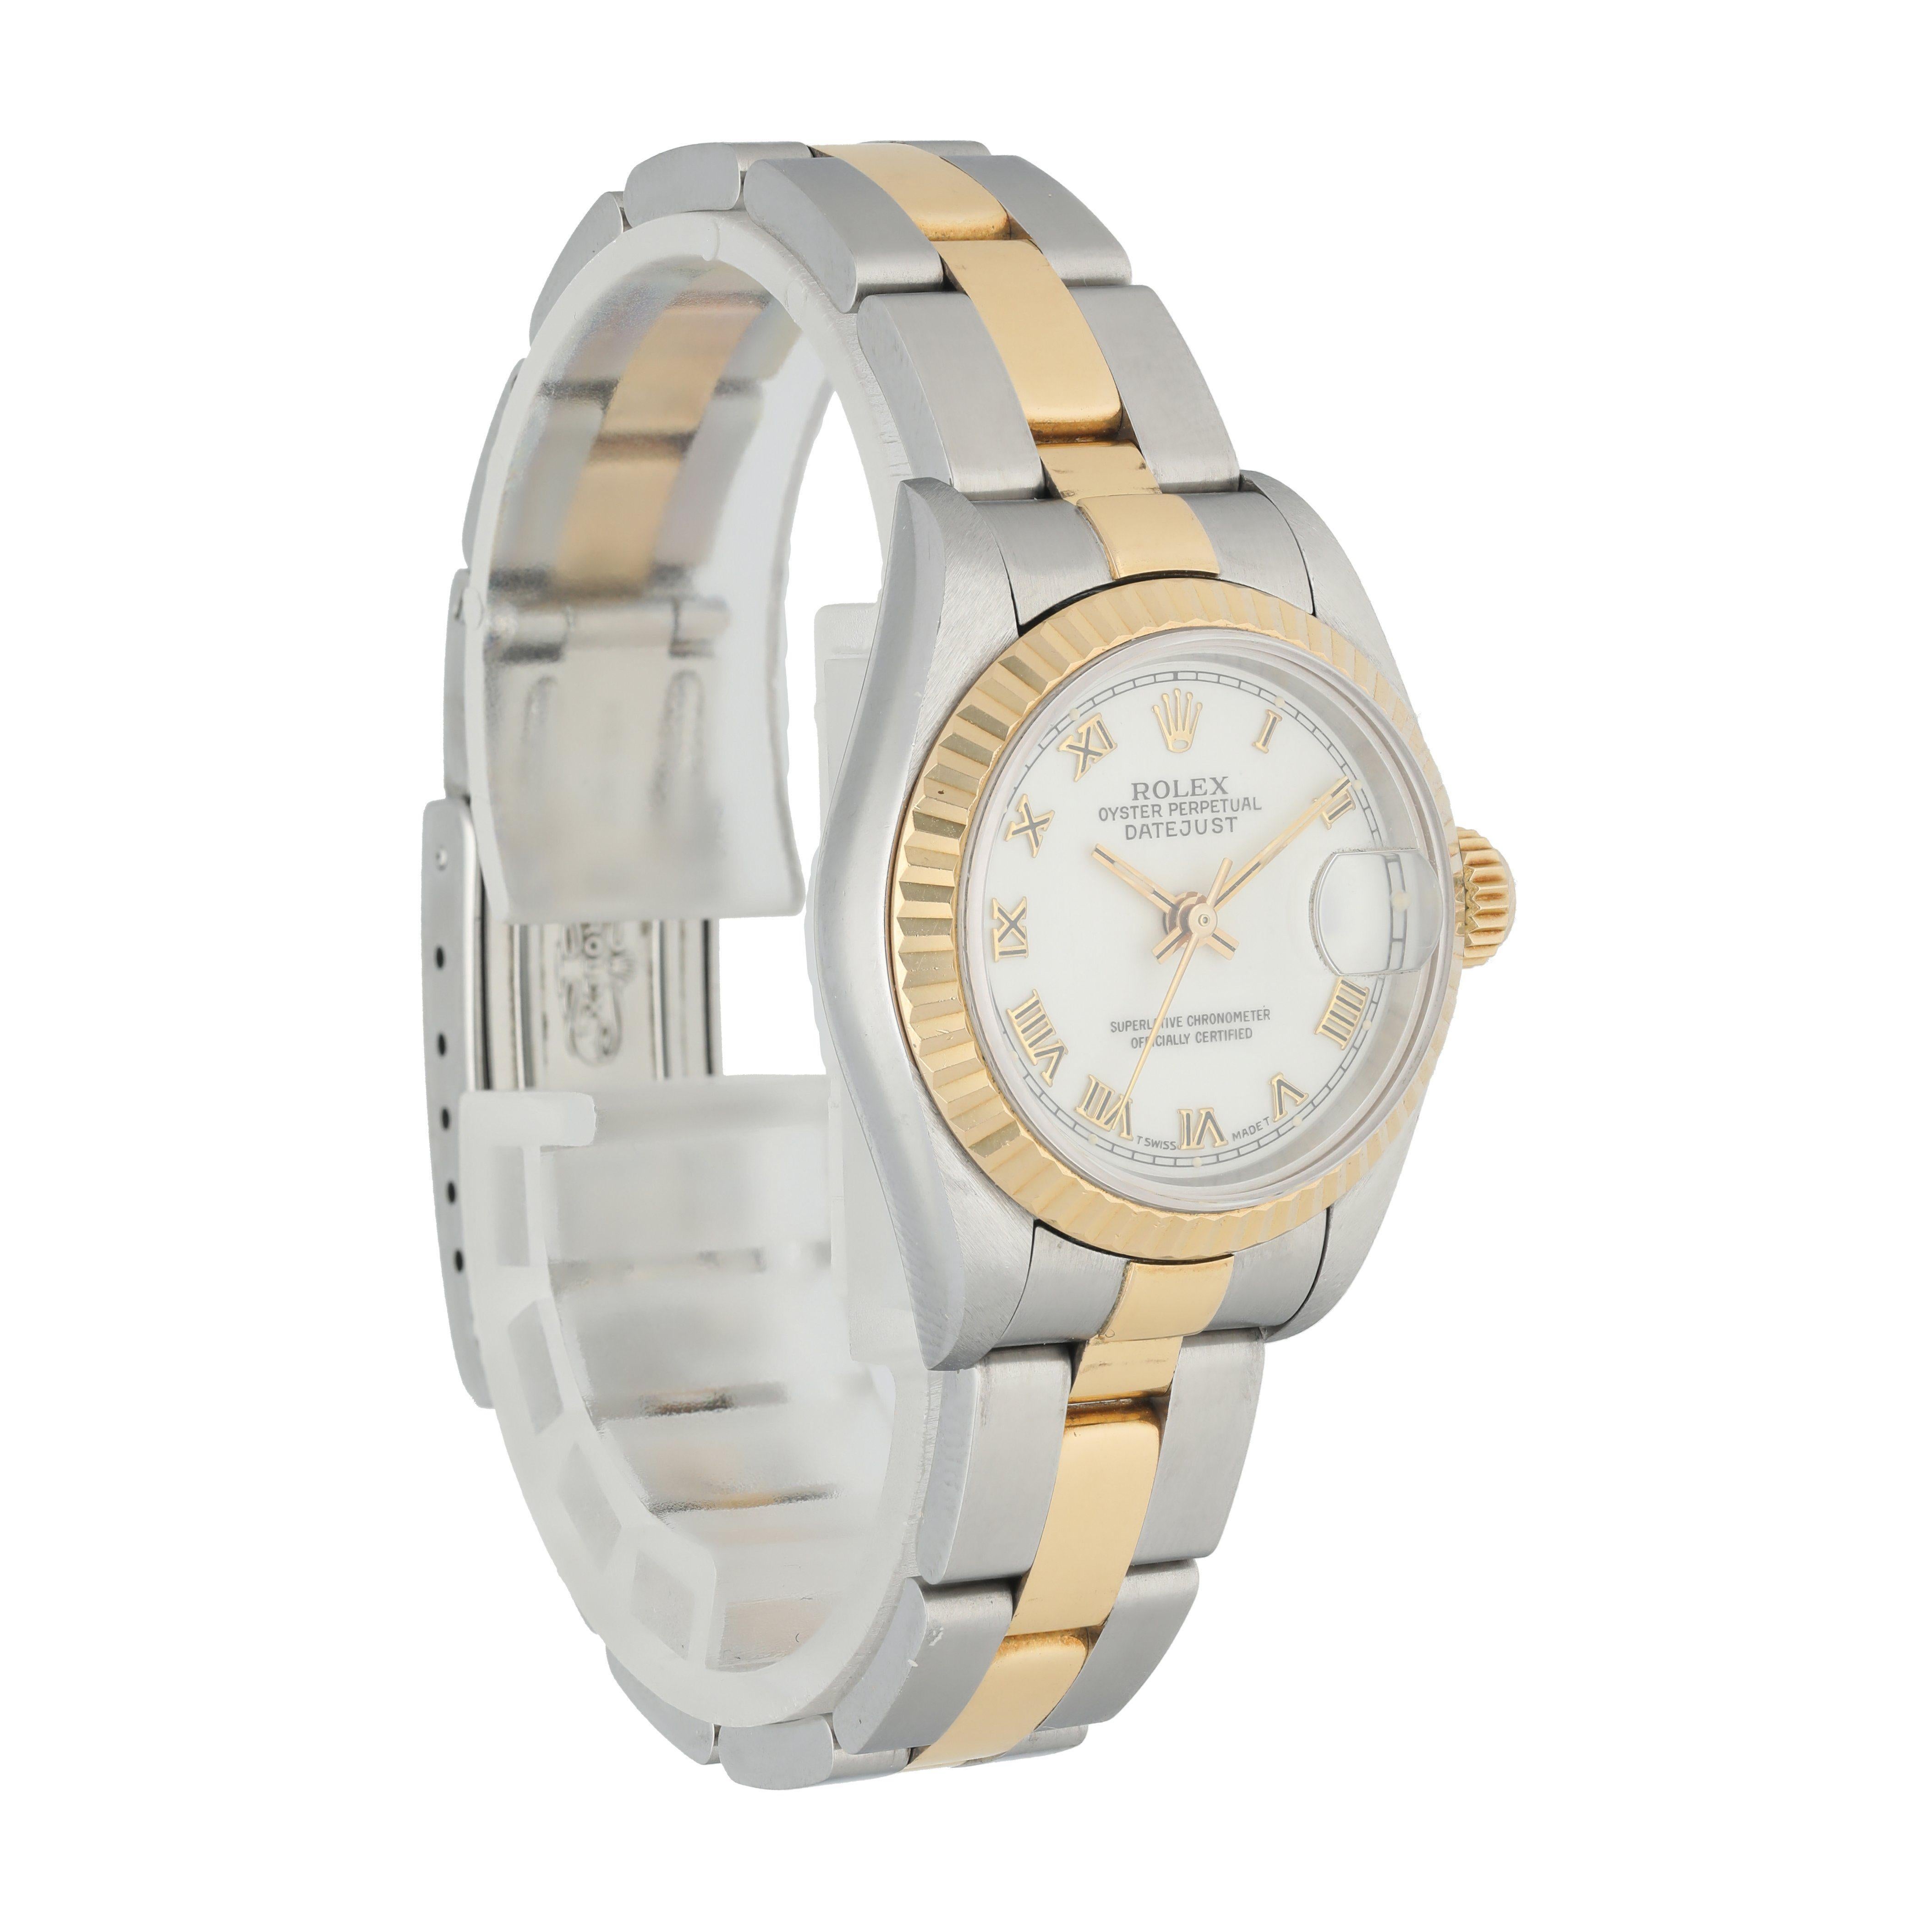 Rolex Datejust 69173 Ladies Watch In Excellent Condition For Sale In New York, NY